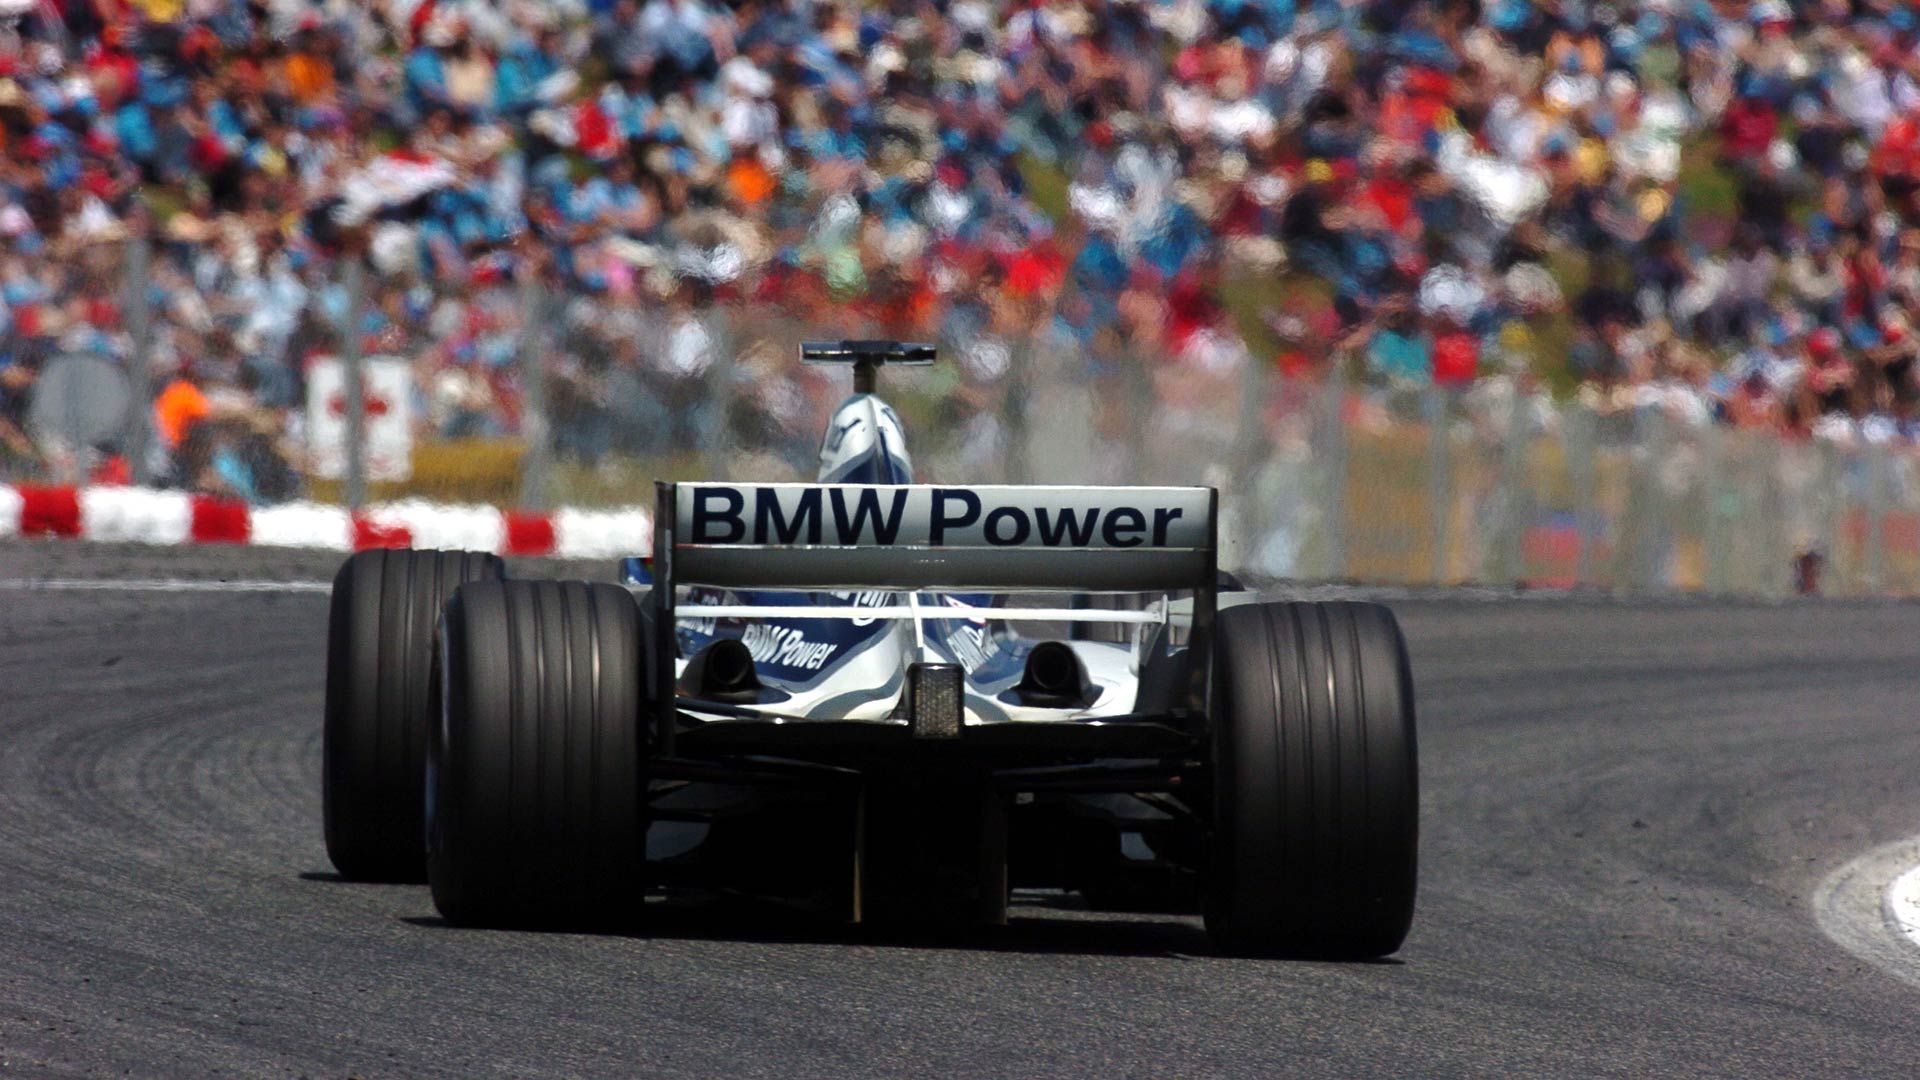 BMW’s brand takeover of Williams Racing